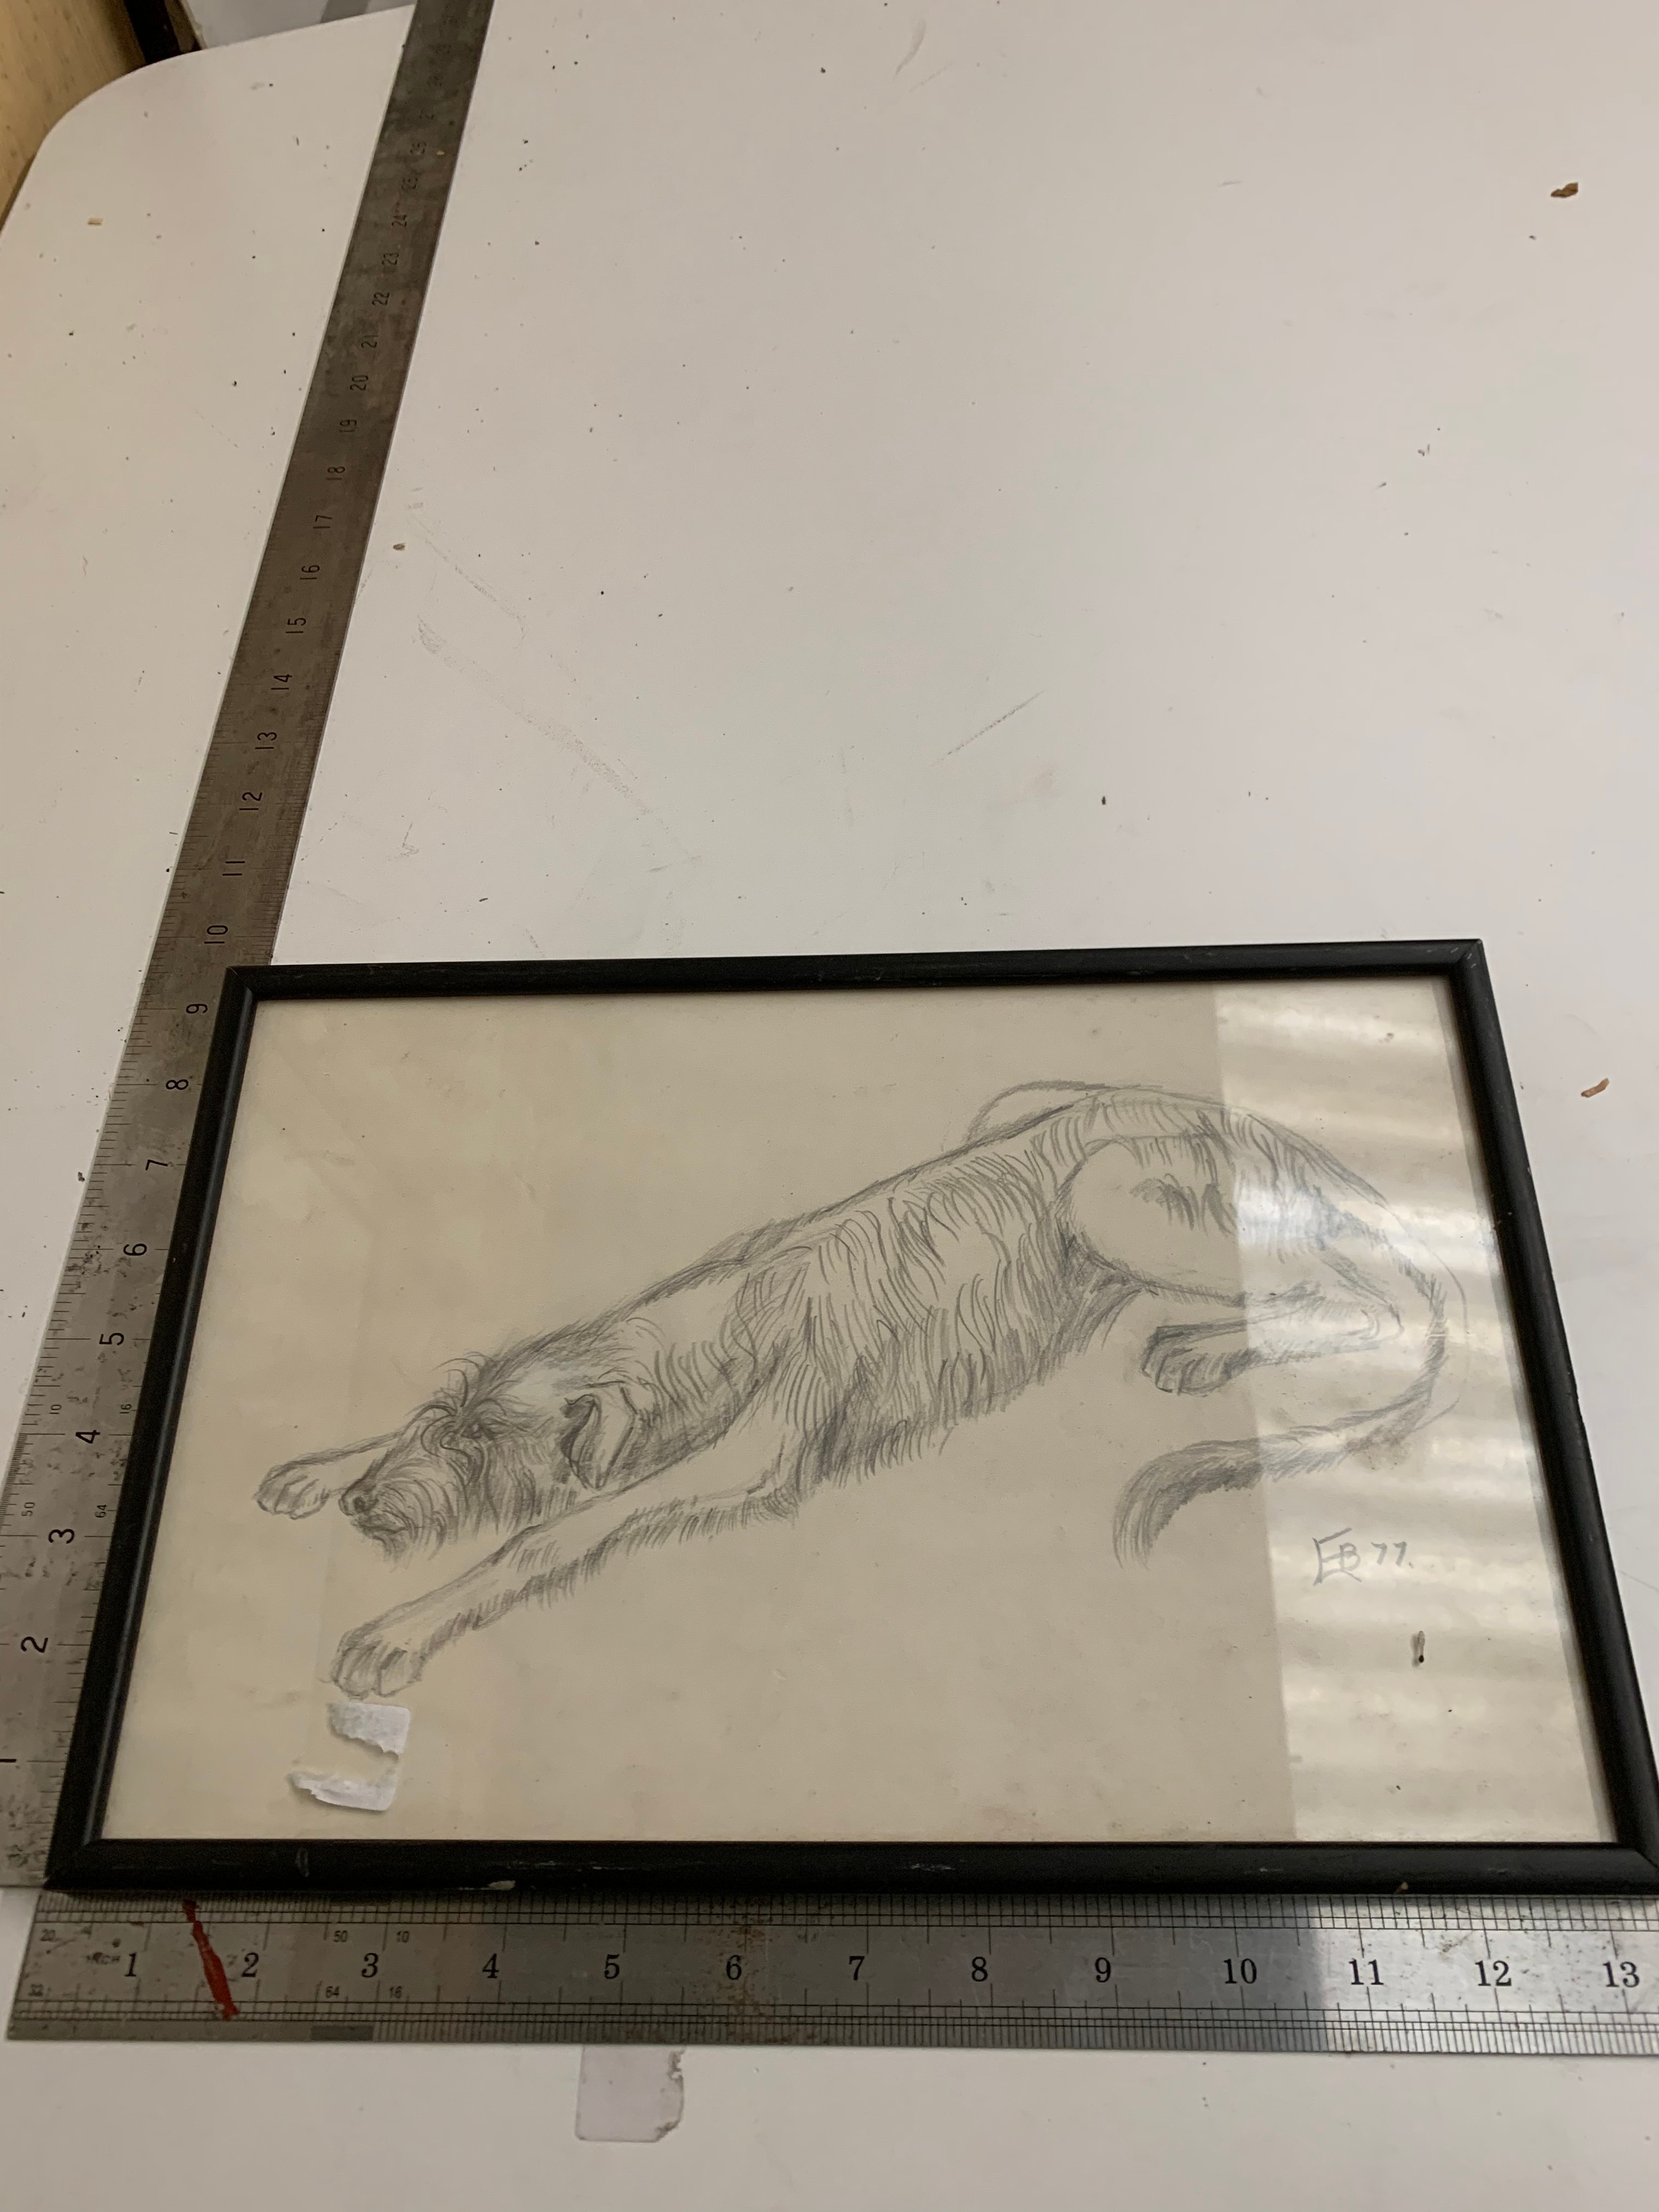 Pencil drawing of a dog Signed E.B 77